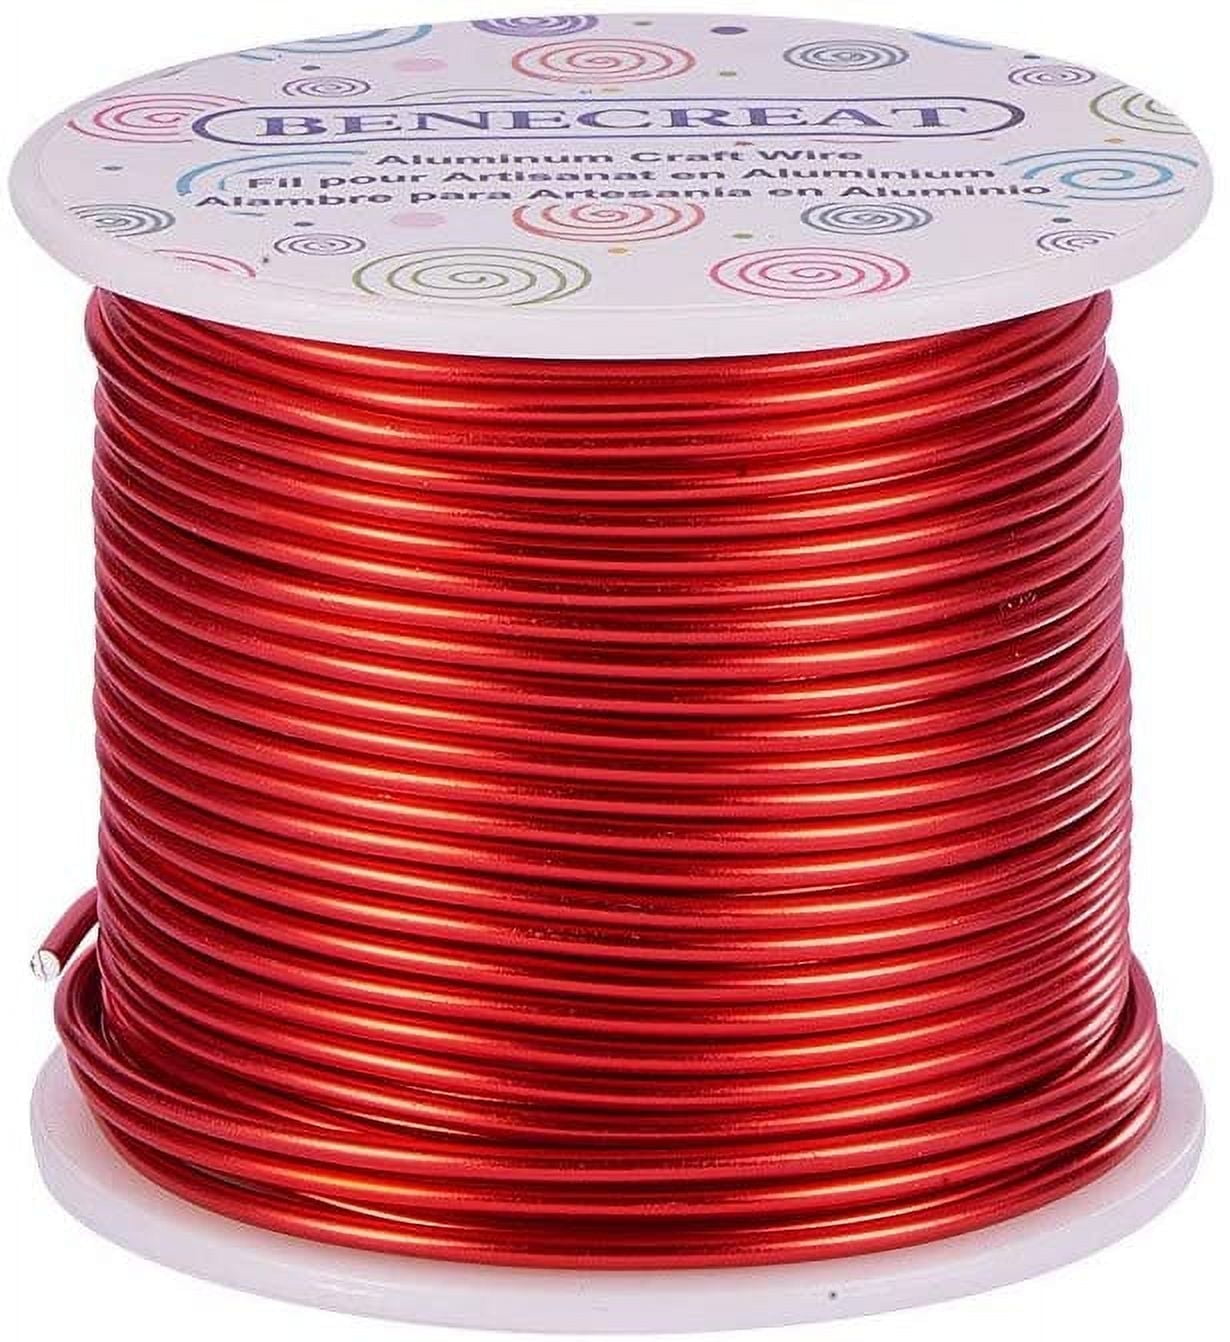 BENECREAT 12 Gauge Transparent PVC Plastic Covered Aluminum Wire 100FT  Bendable Aluminum Craft Wire for Hair Bows, Shaping Hat Brim, and Other  Crafts